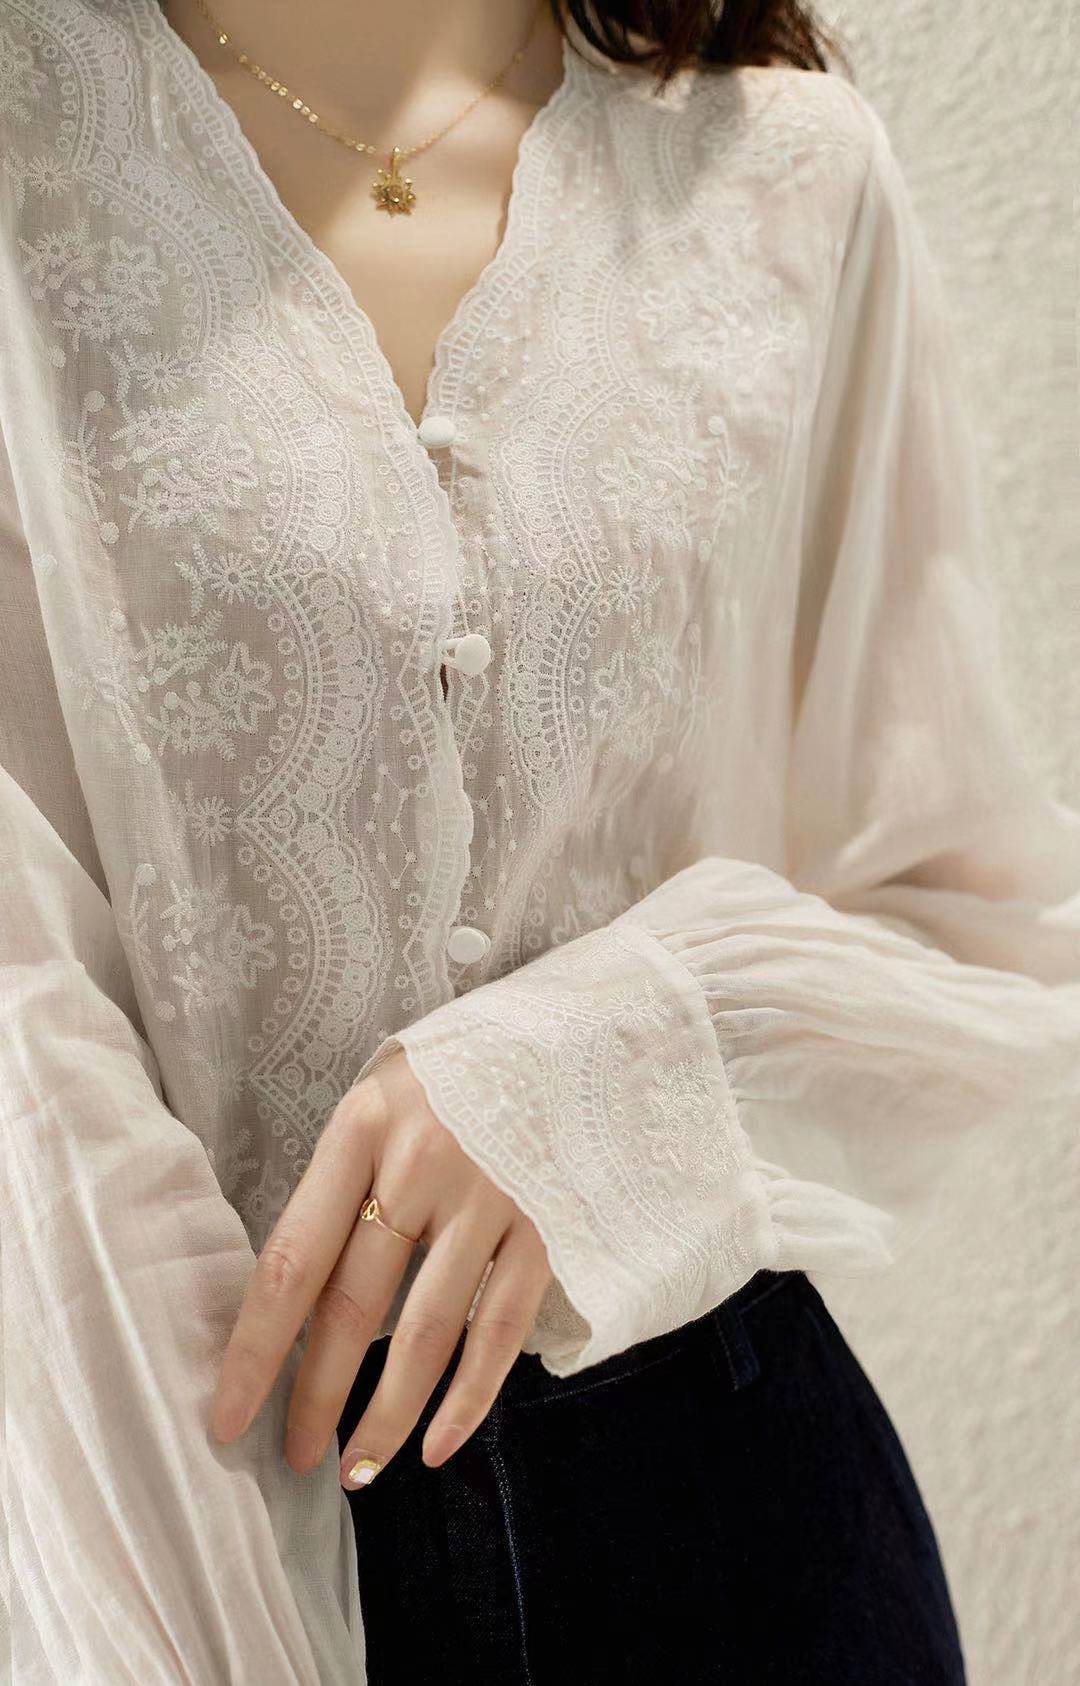 French Embroidery Elegant Blouse